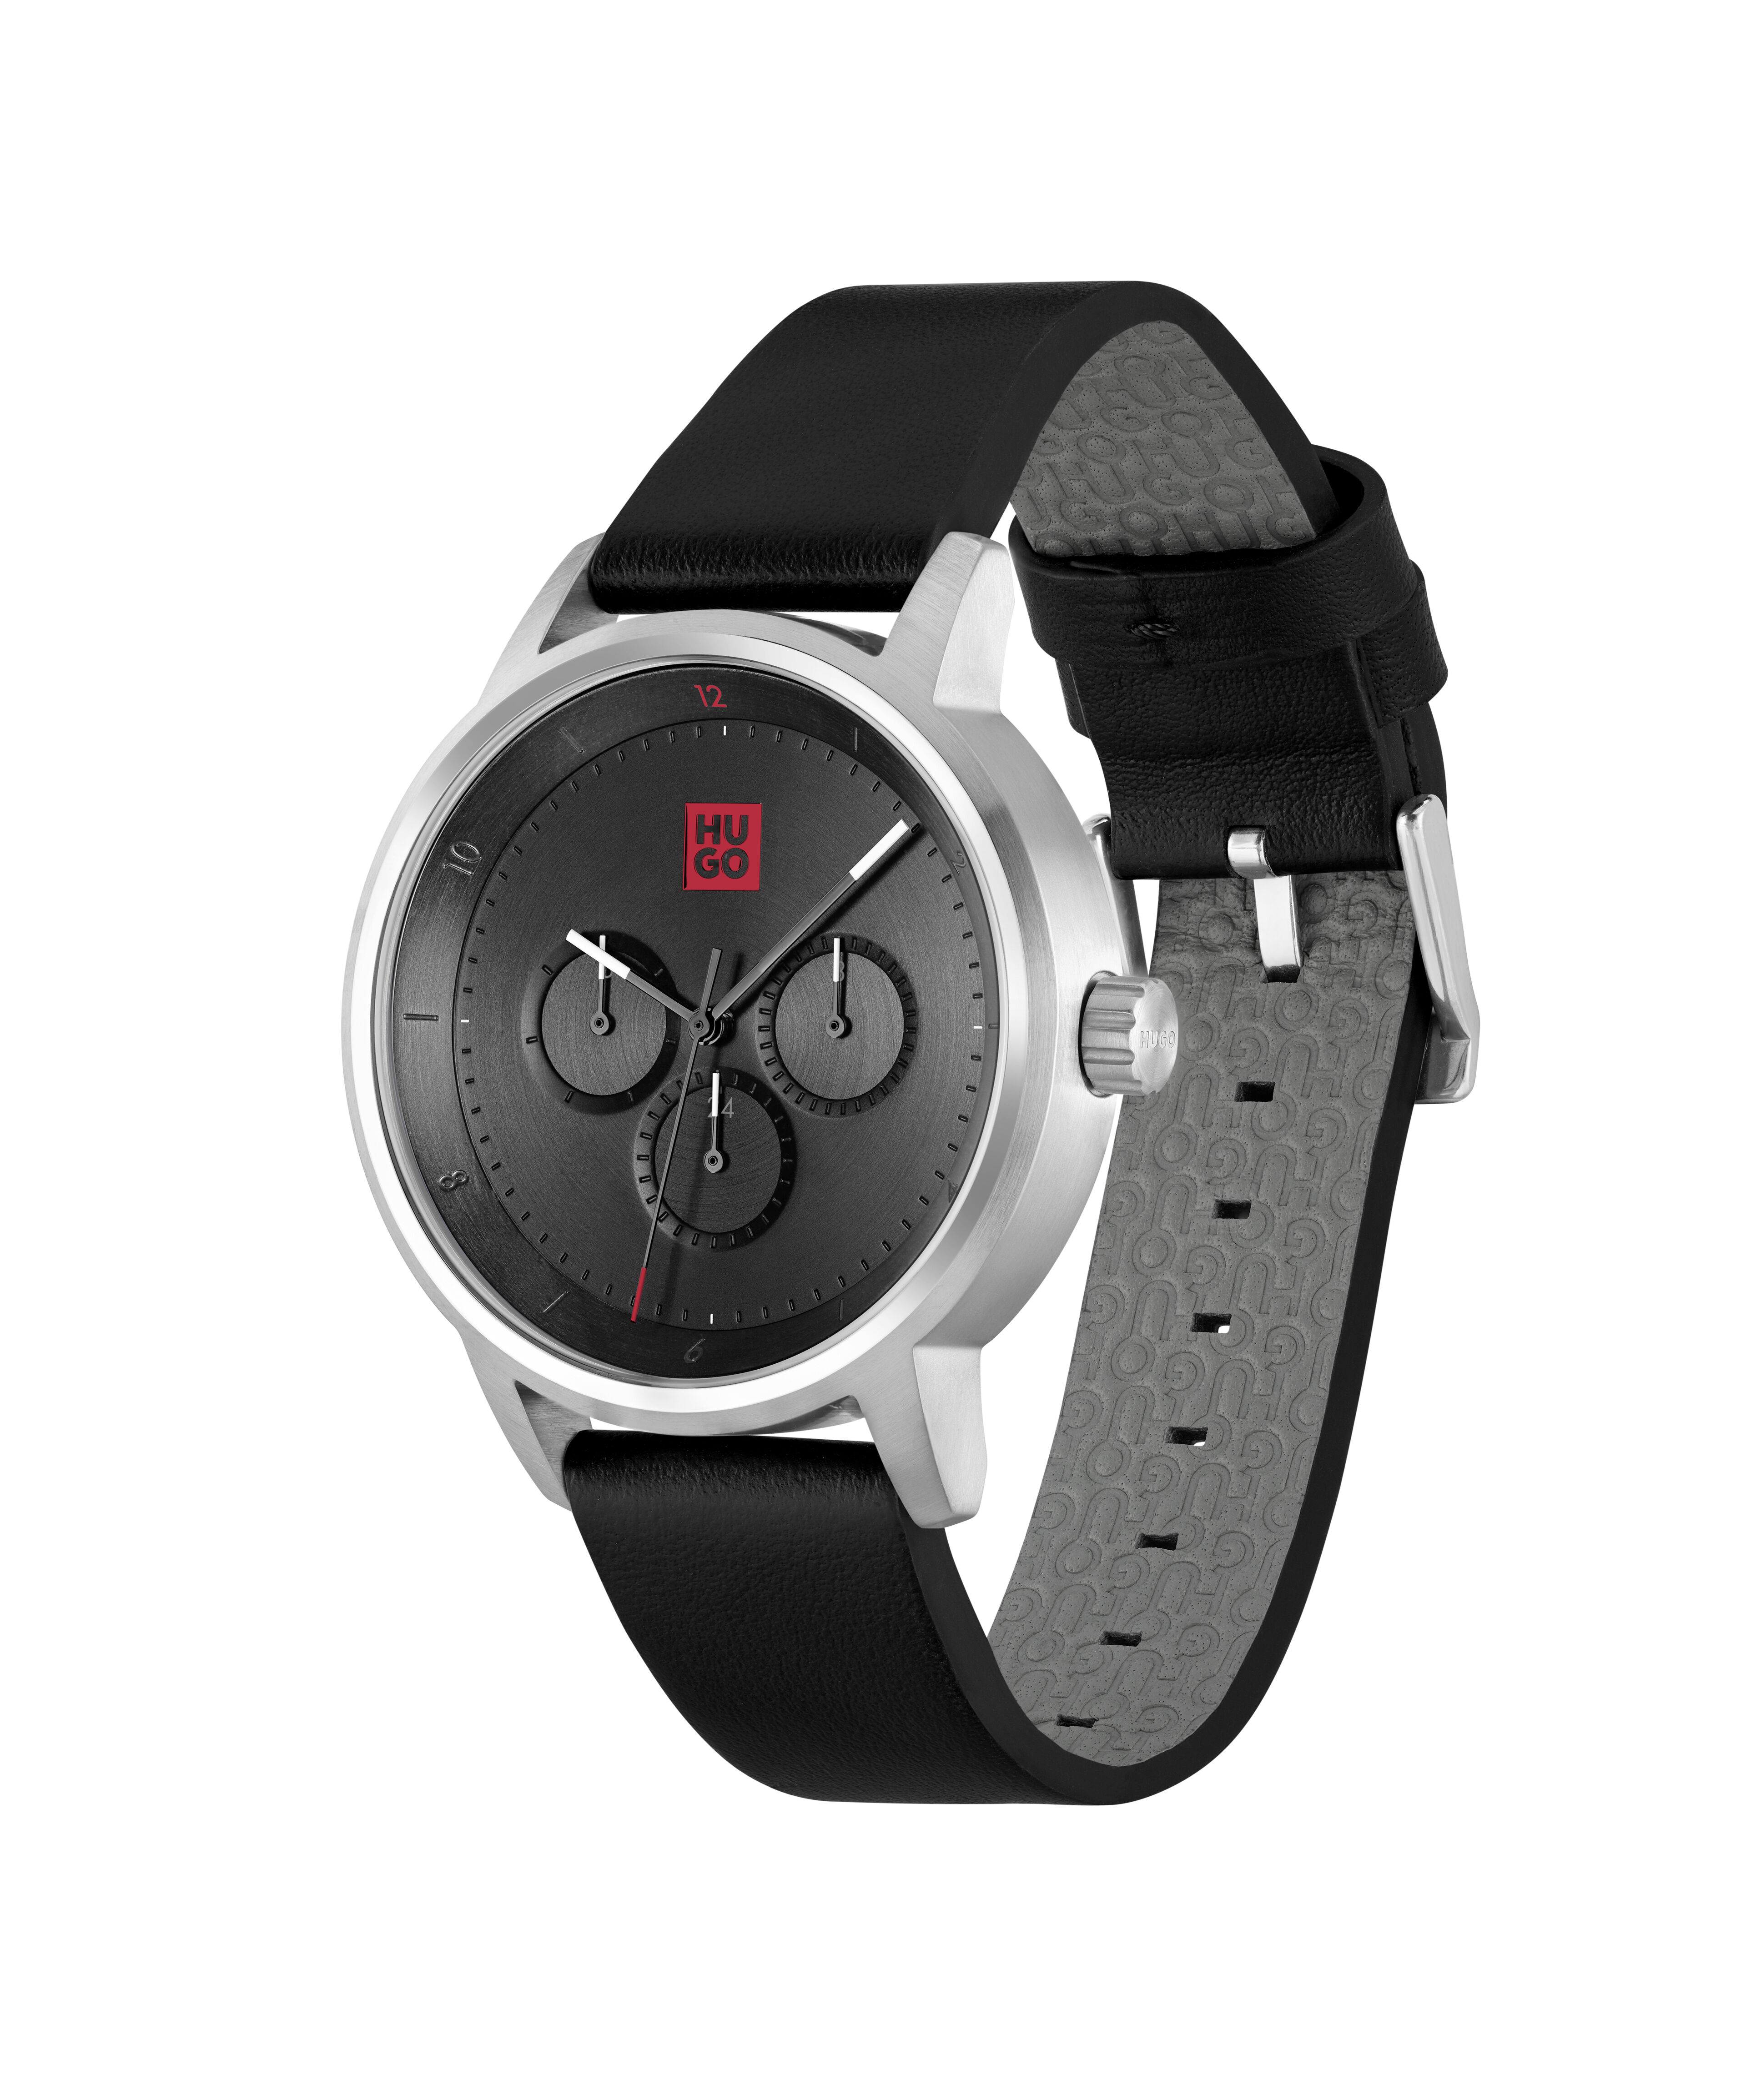 Two Face analog and smartwatch must be flipped to switch the watch mode -  Yanko Design